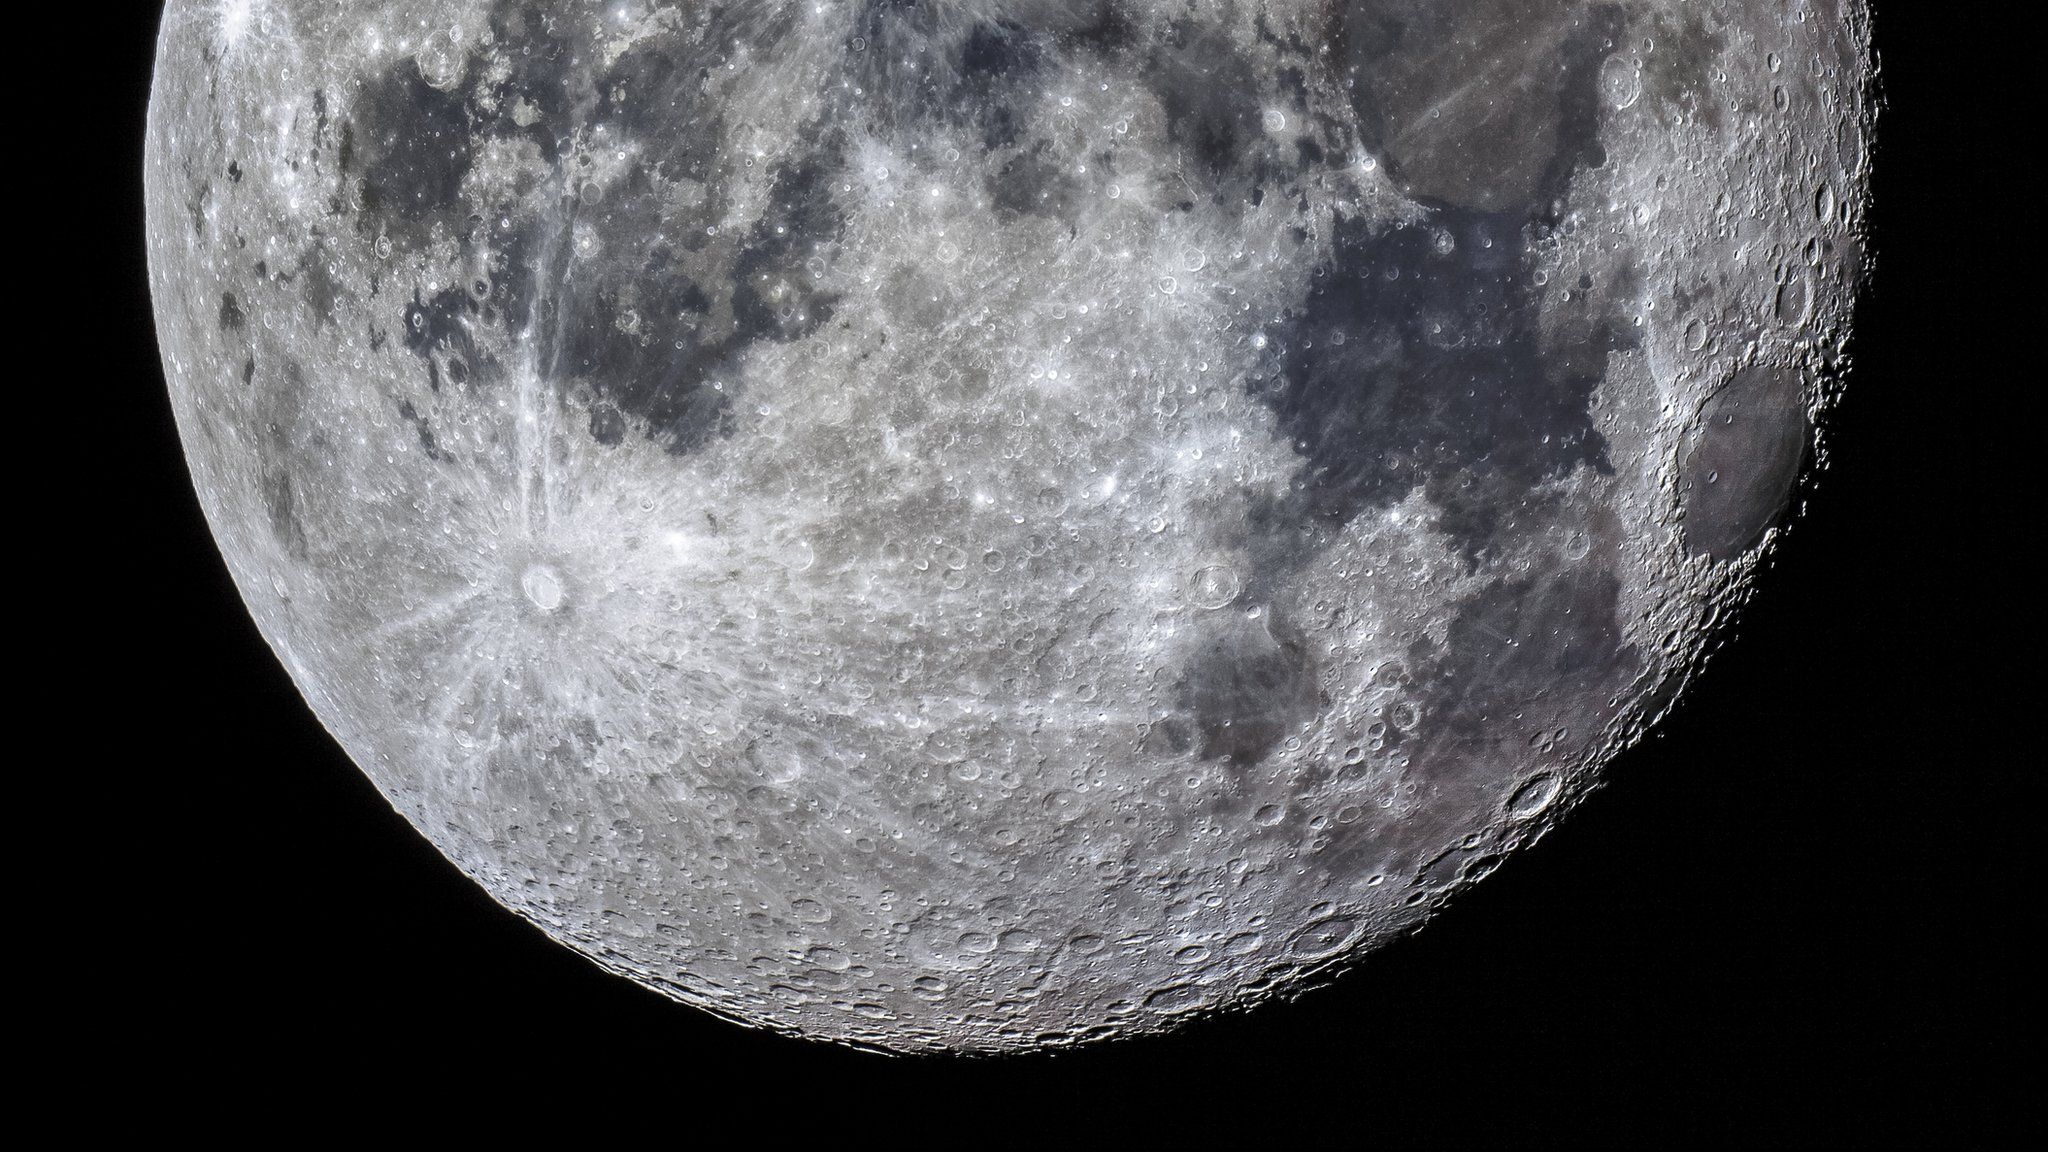 telescope image of the moon surface